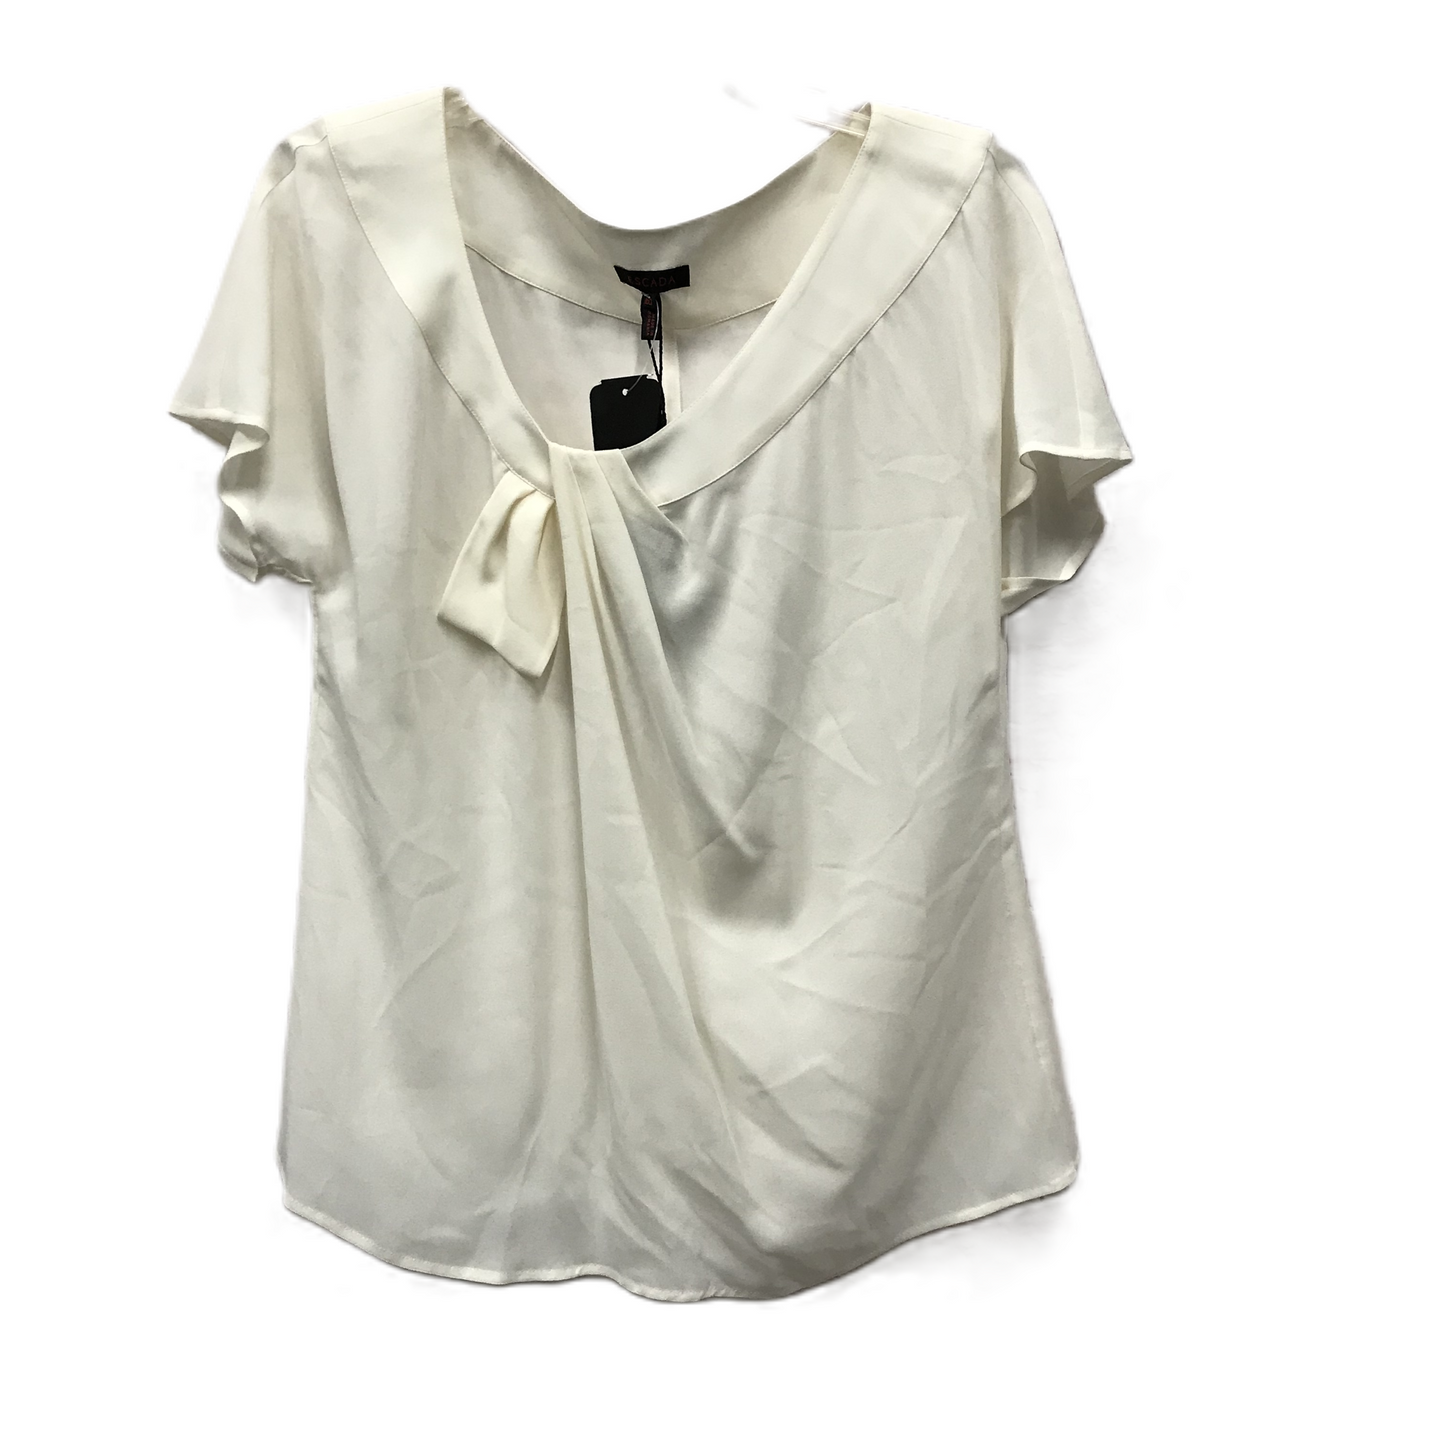 White Top Short Sleeve By Escada, Size: M